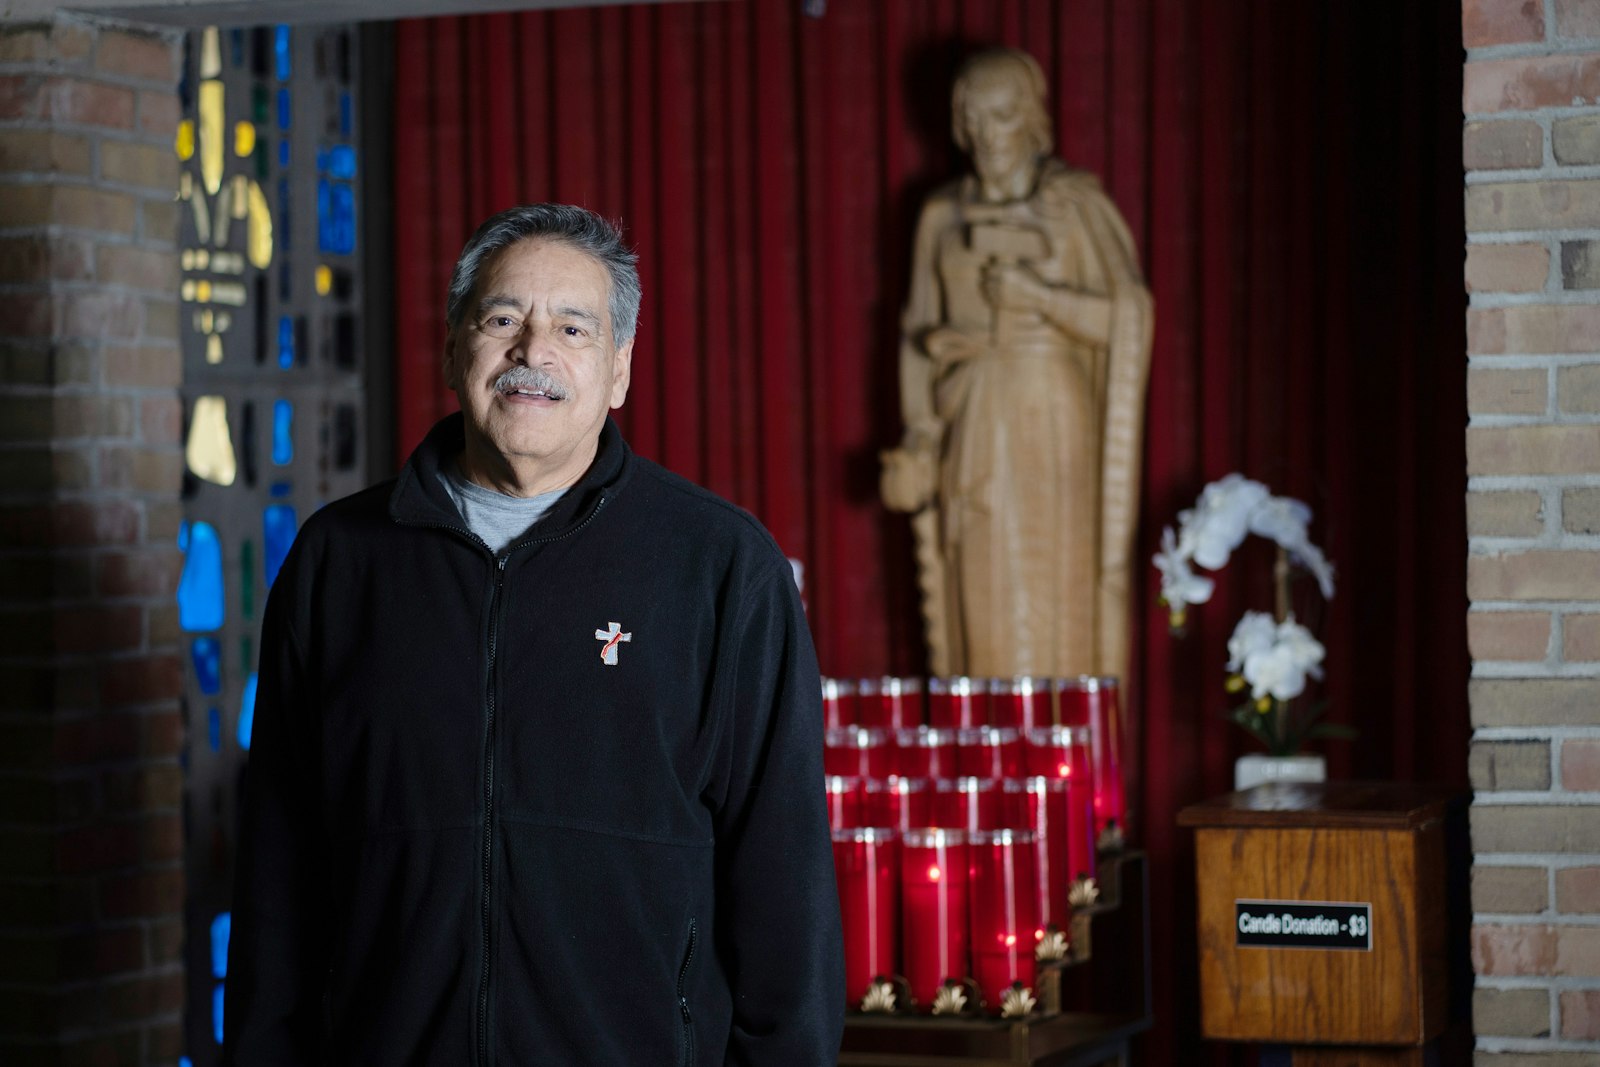 Deacon Alfredo "Fred" Guardiola, a deacon at St. Frances Cabrini Parish in Allen Park, helps coordinate volunteers for prison ministry at the Women's Huron Valley Correctional Facility in Ypsilanti with the help of the Archdiocese of Detroit's Office of Evangelical Charity. (Valaurian Waller | Detroit Catholic)